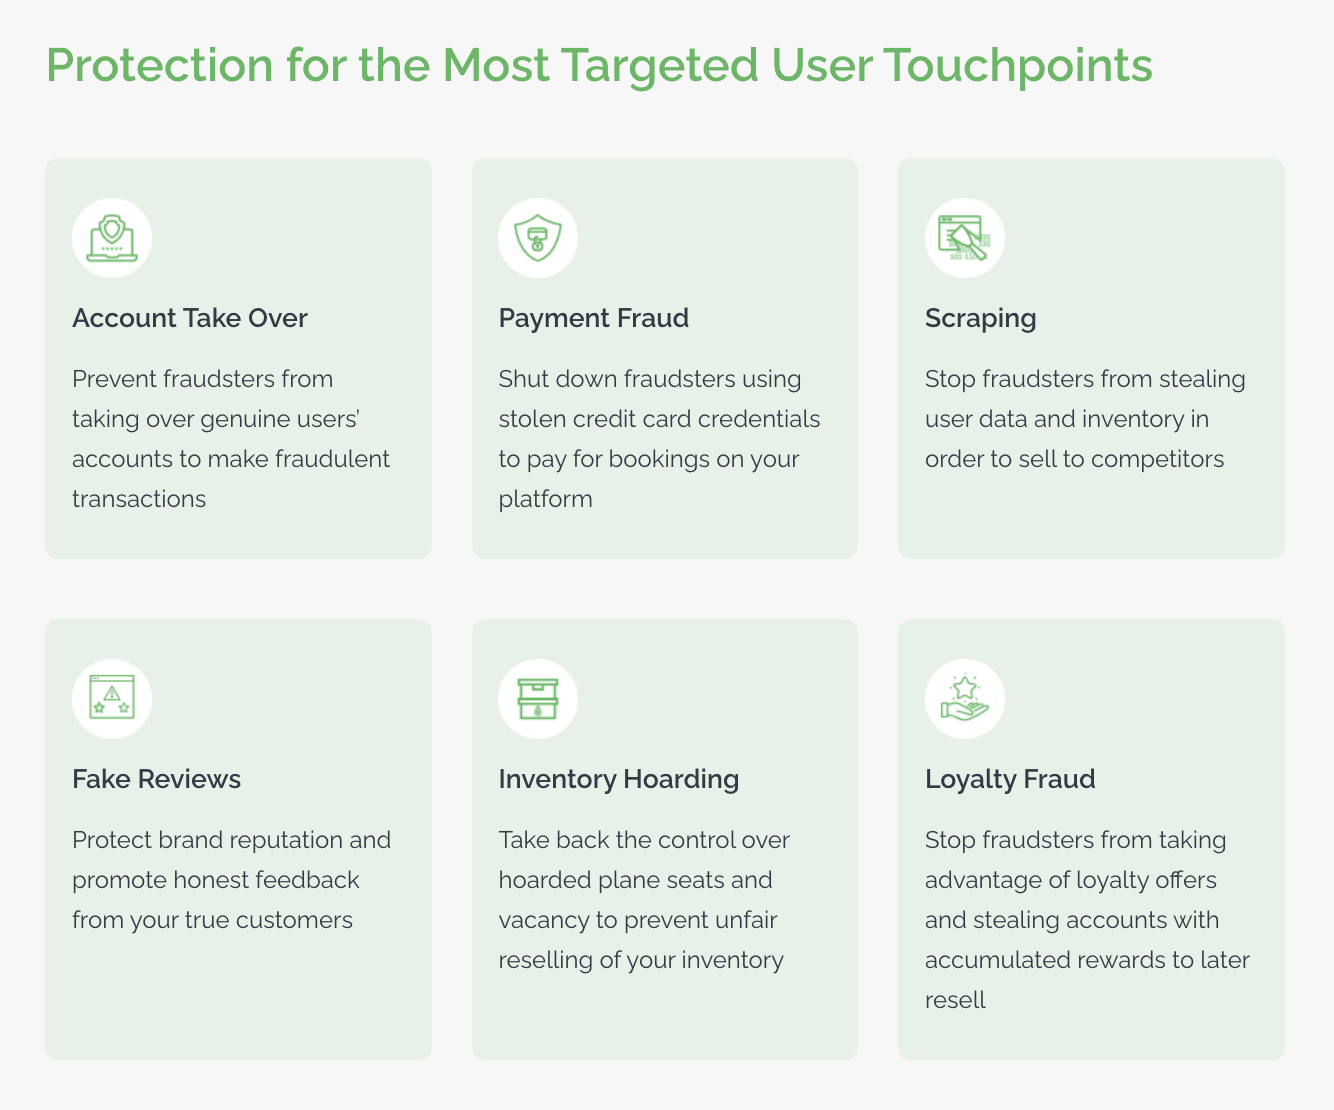 Arkose Labs protects the most targeted user touchpoints